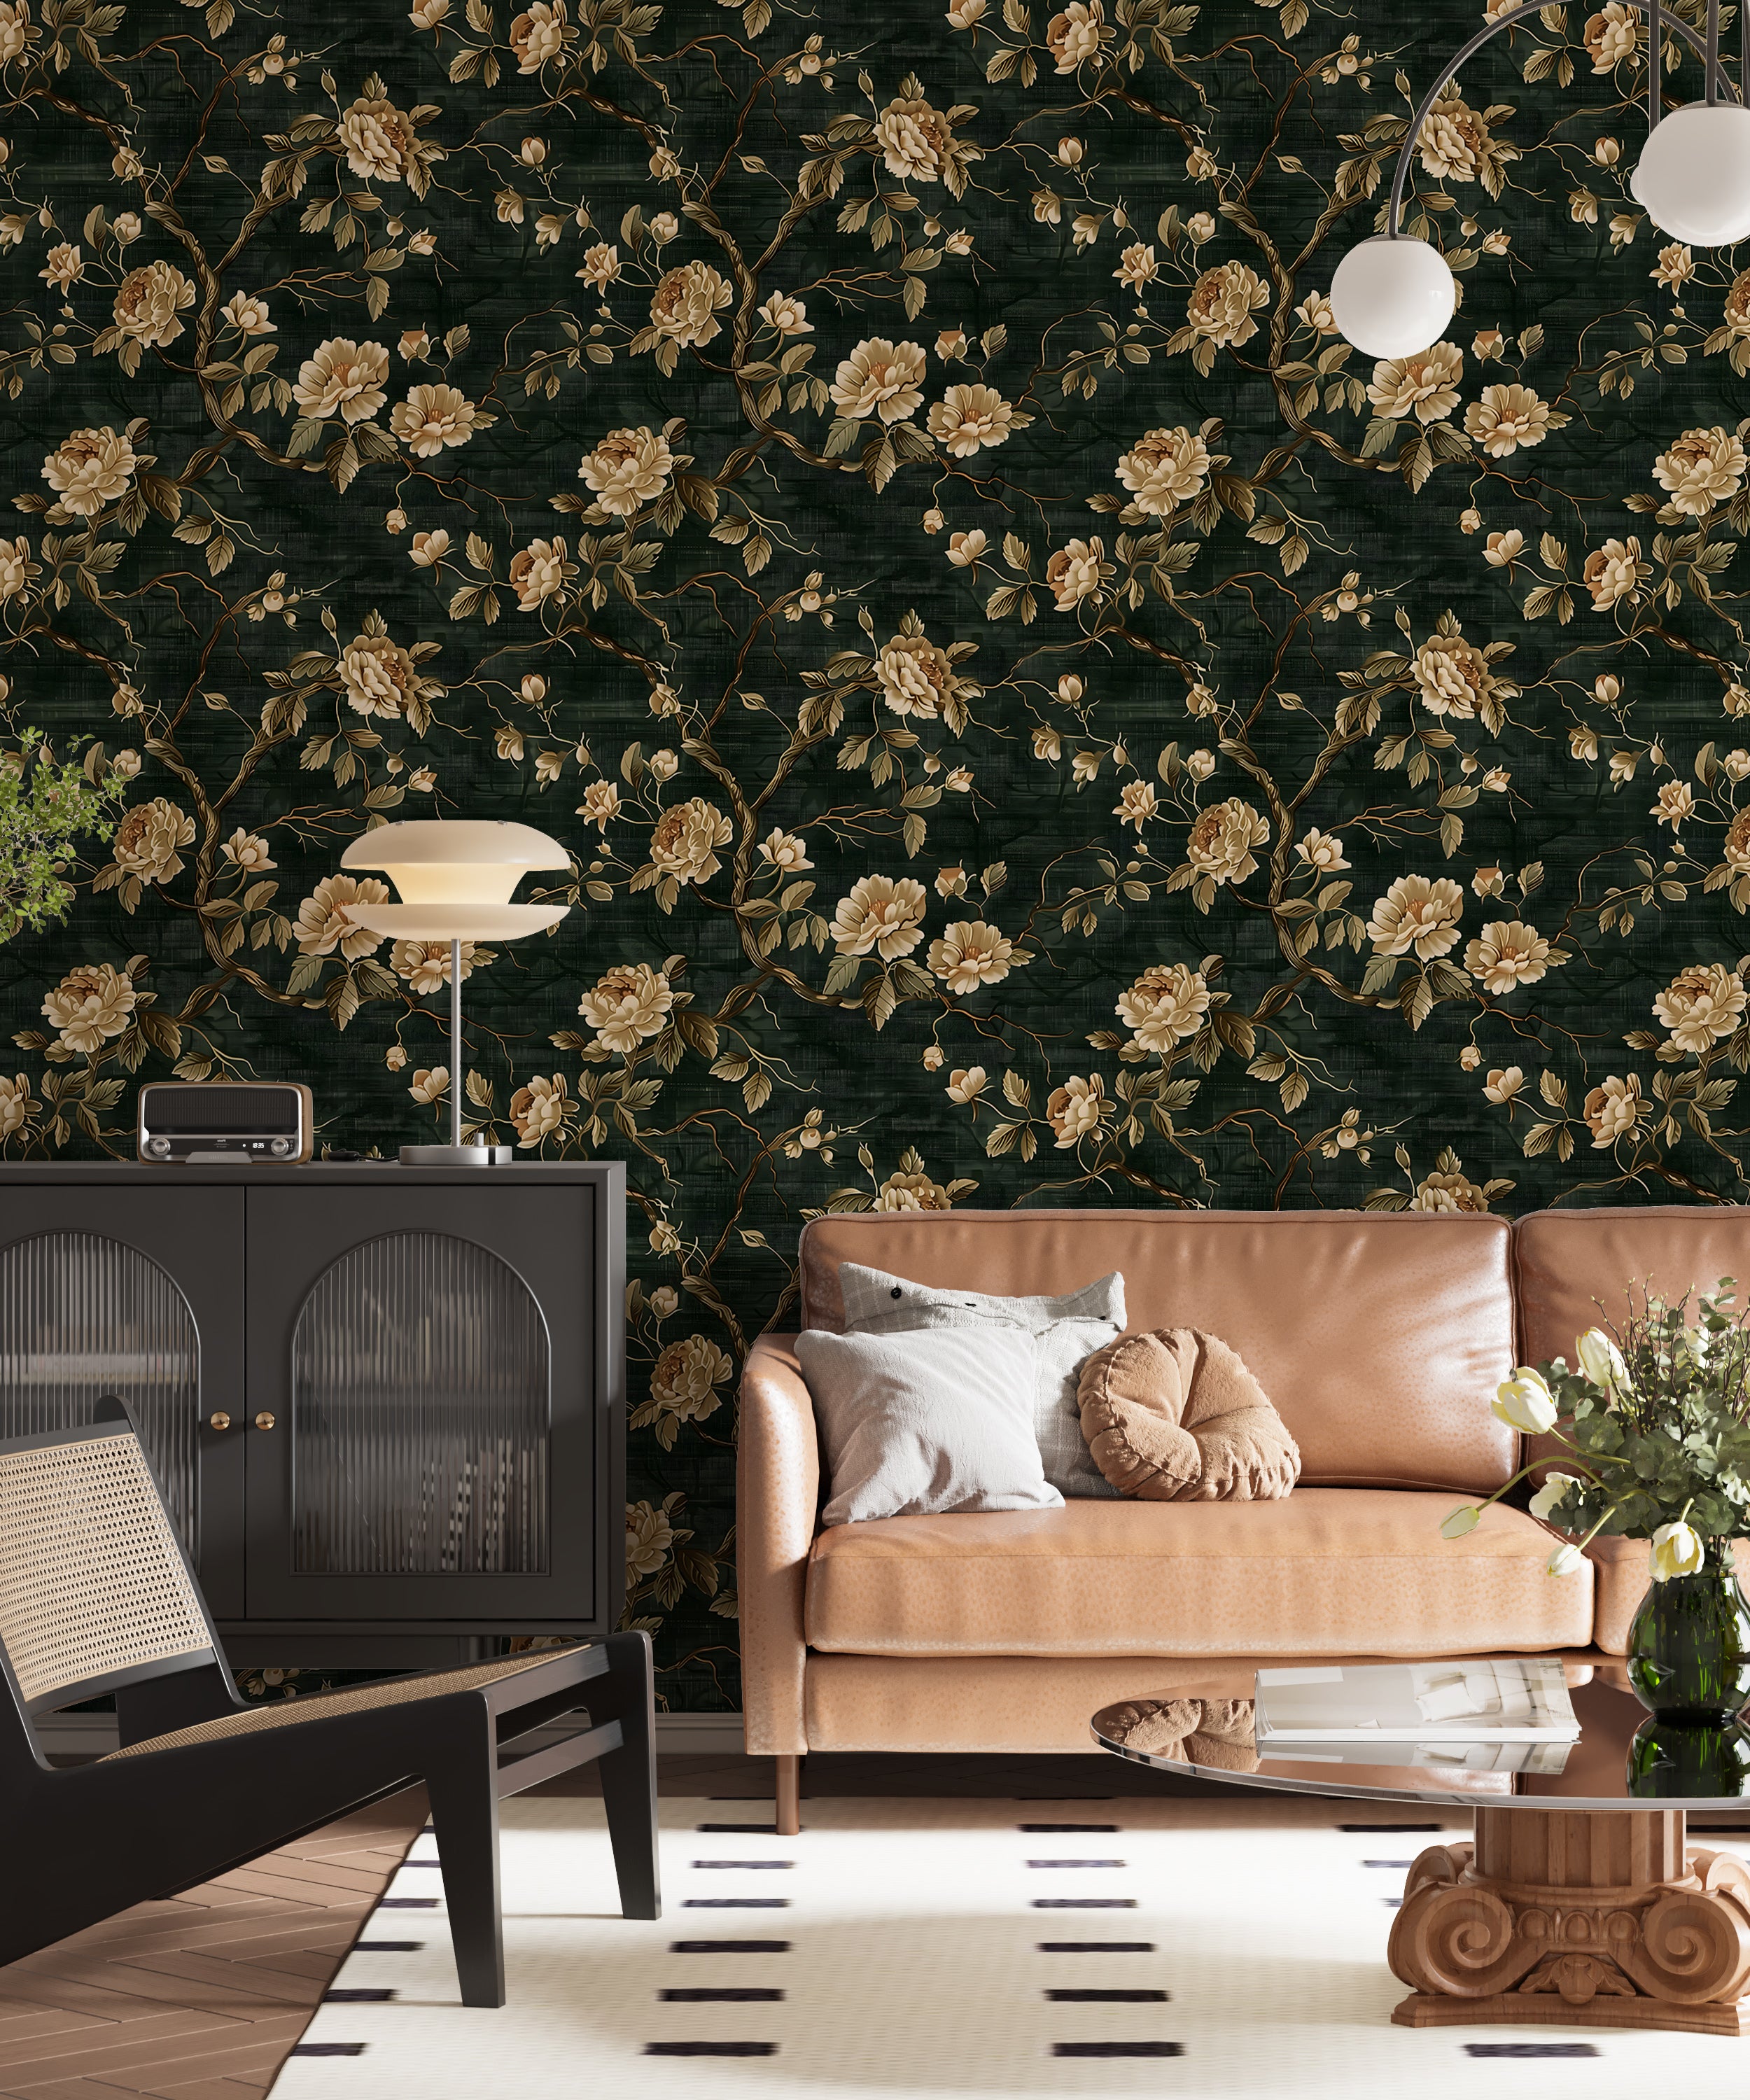 Classic green and gold removable wallpaper